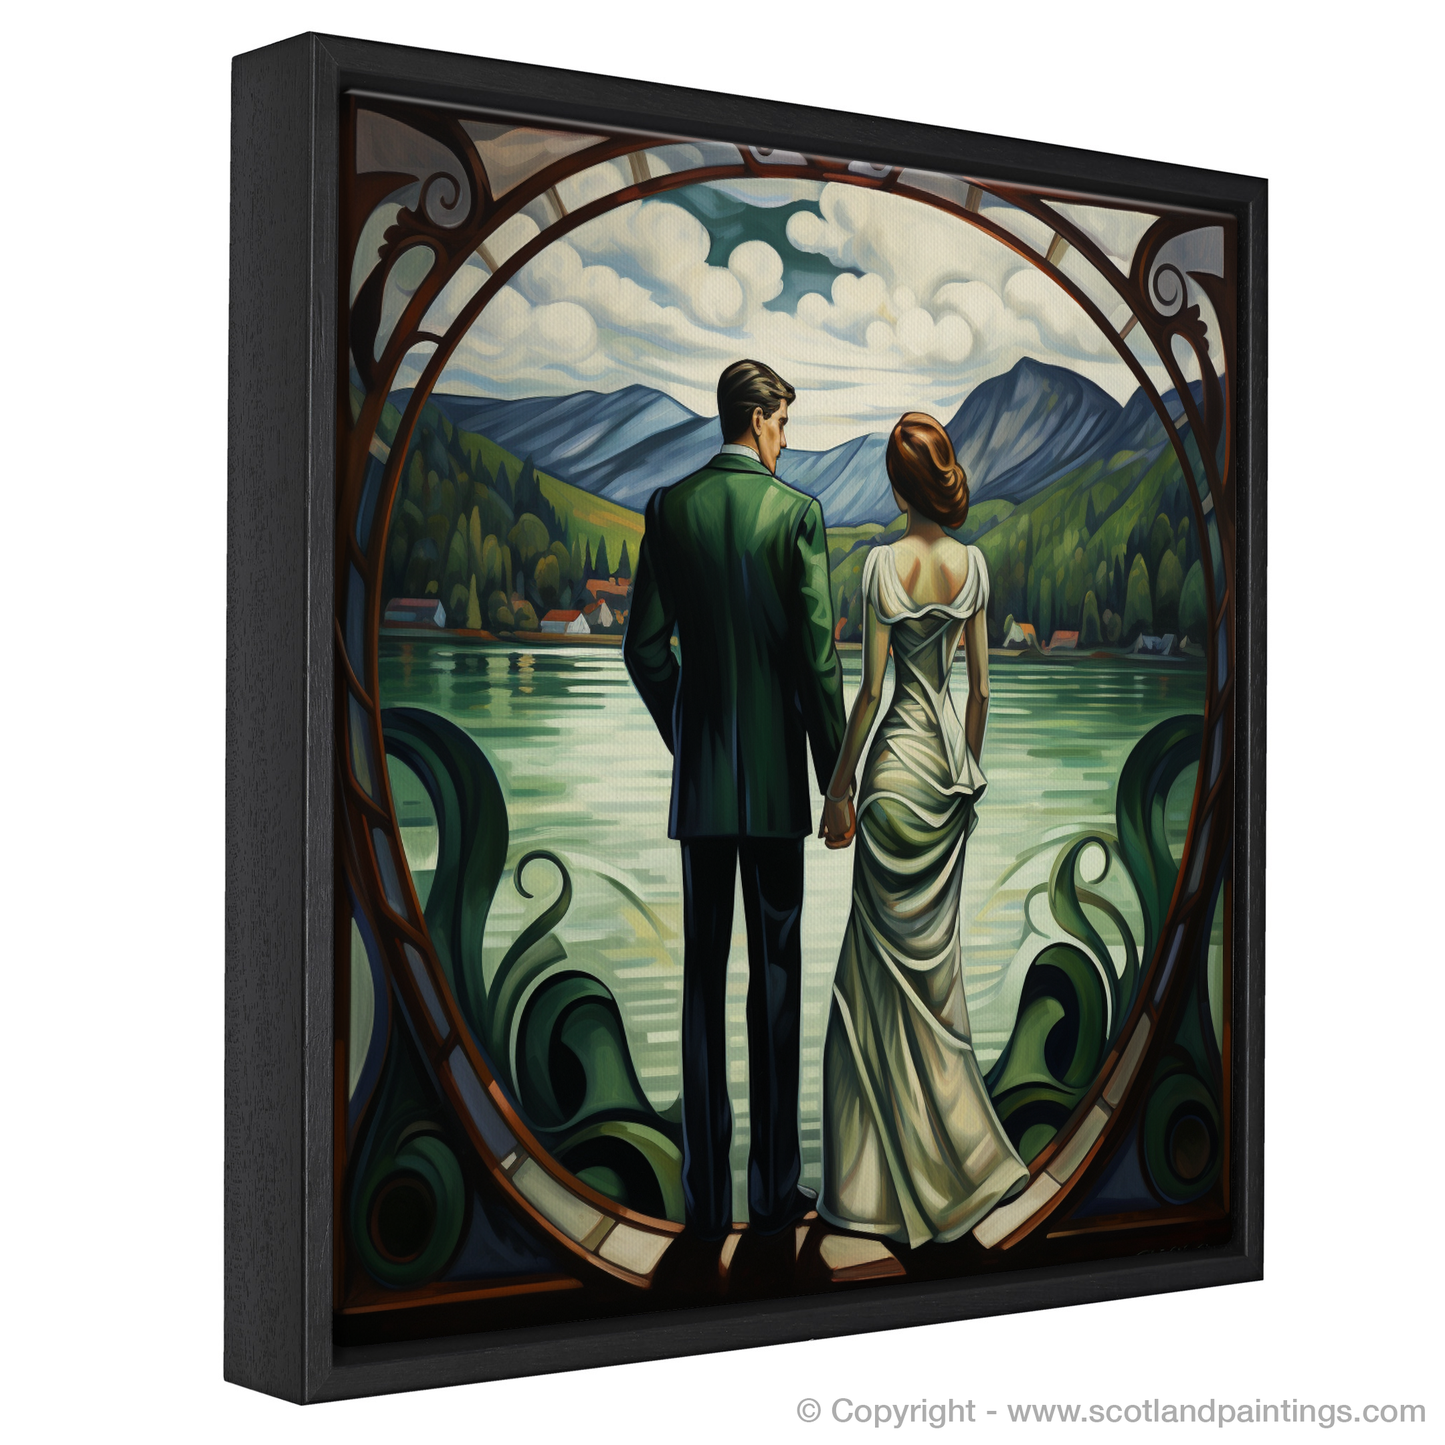 Painting and Art Print of A couple holding hands looking out on Loch Lomond entitled "Hand in Hand at Loch Lomond: An Art Nouveau Tribute".